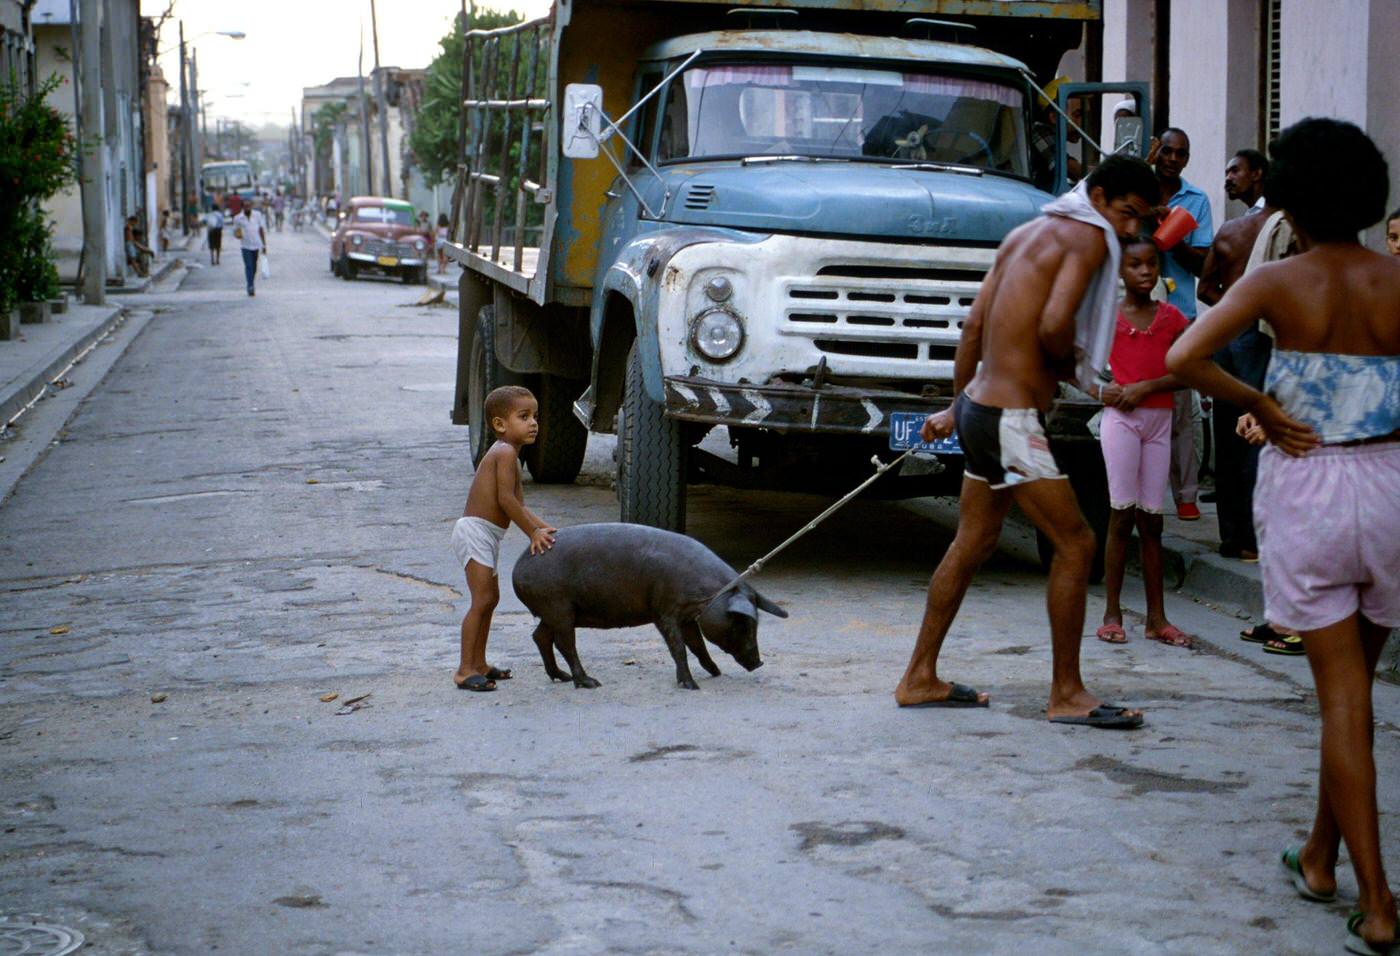 Cuban man dragging a piglet to sell at the market, Cuba, 1990.